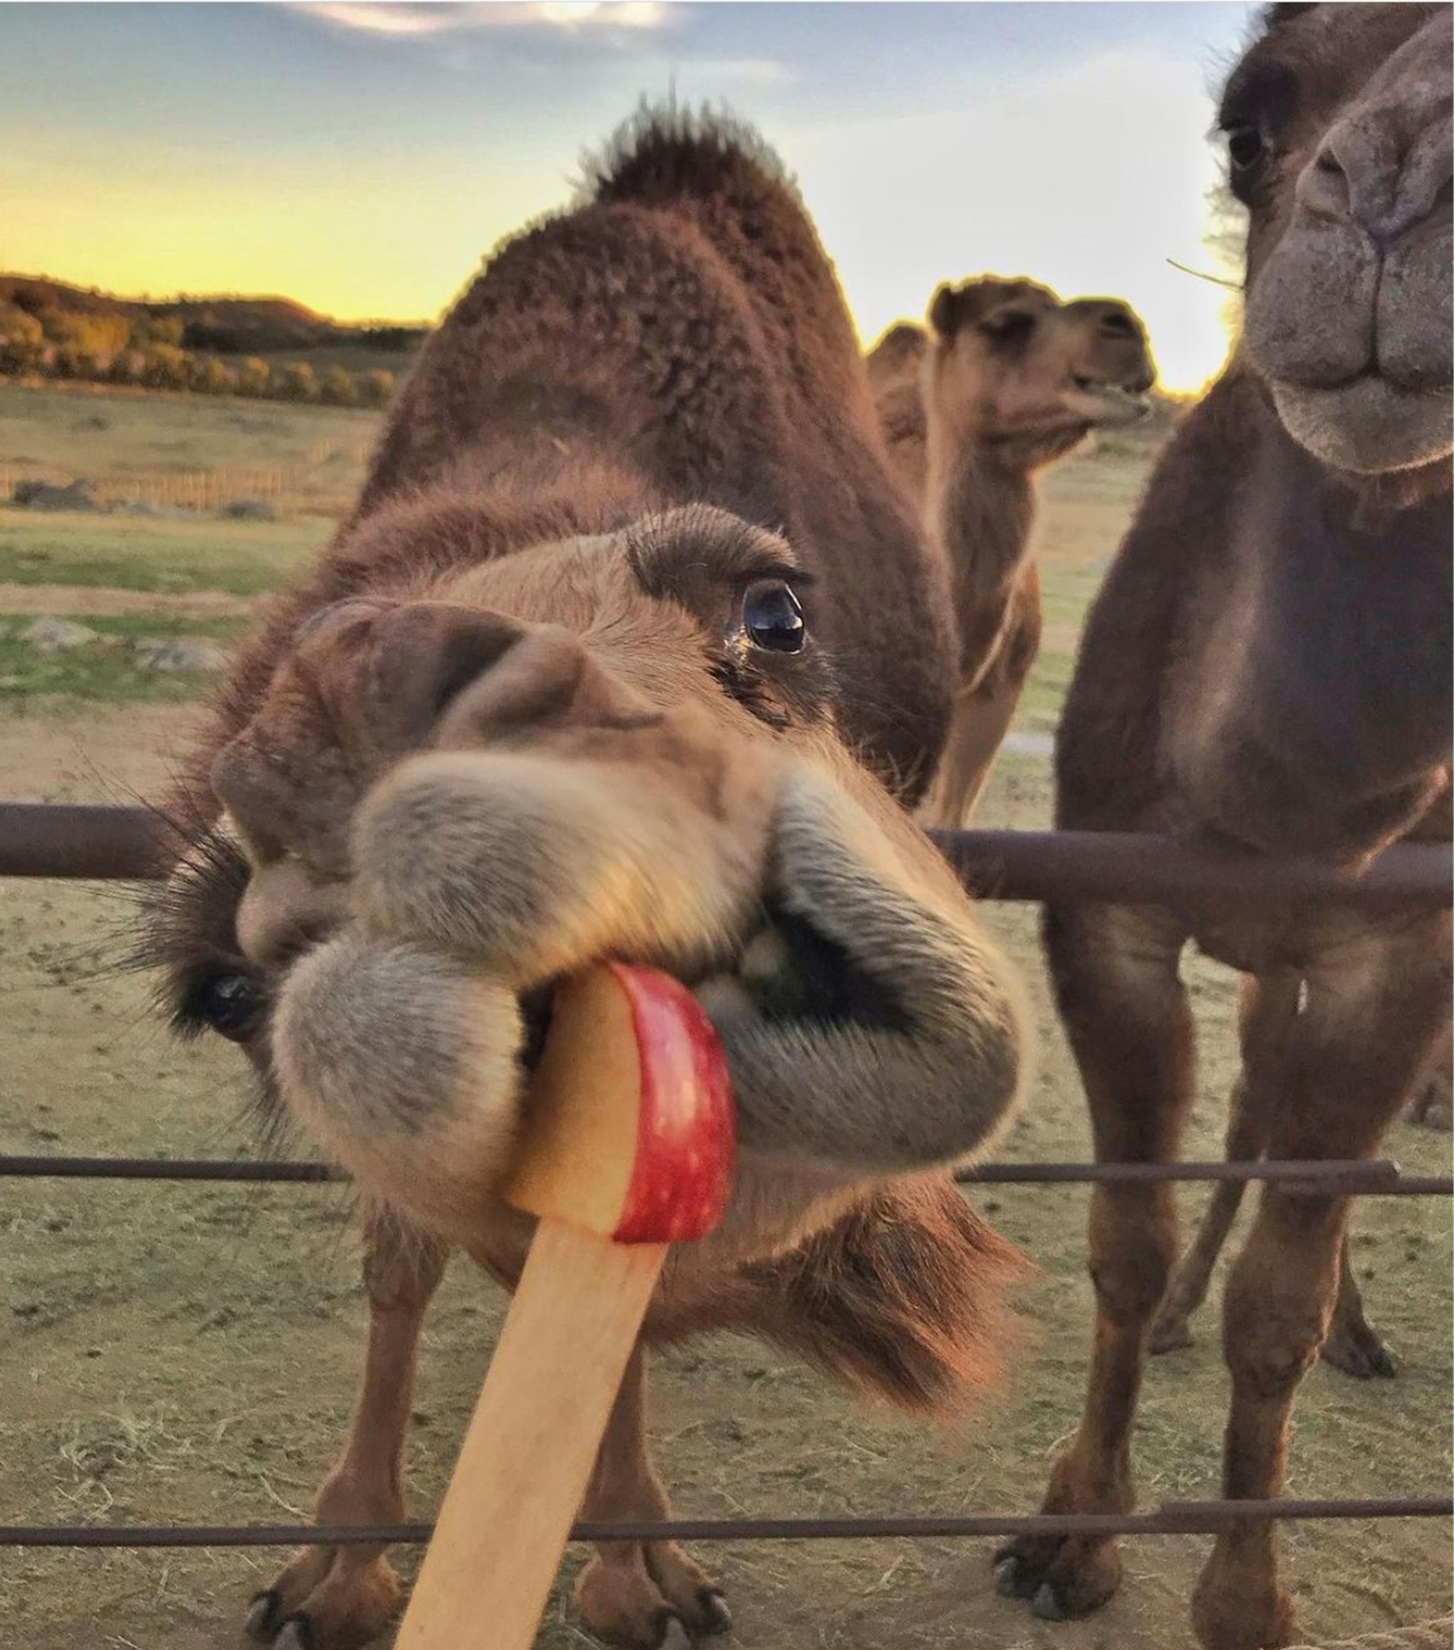 Camels eating apples photo